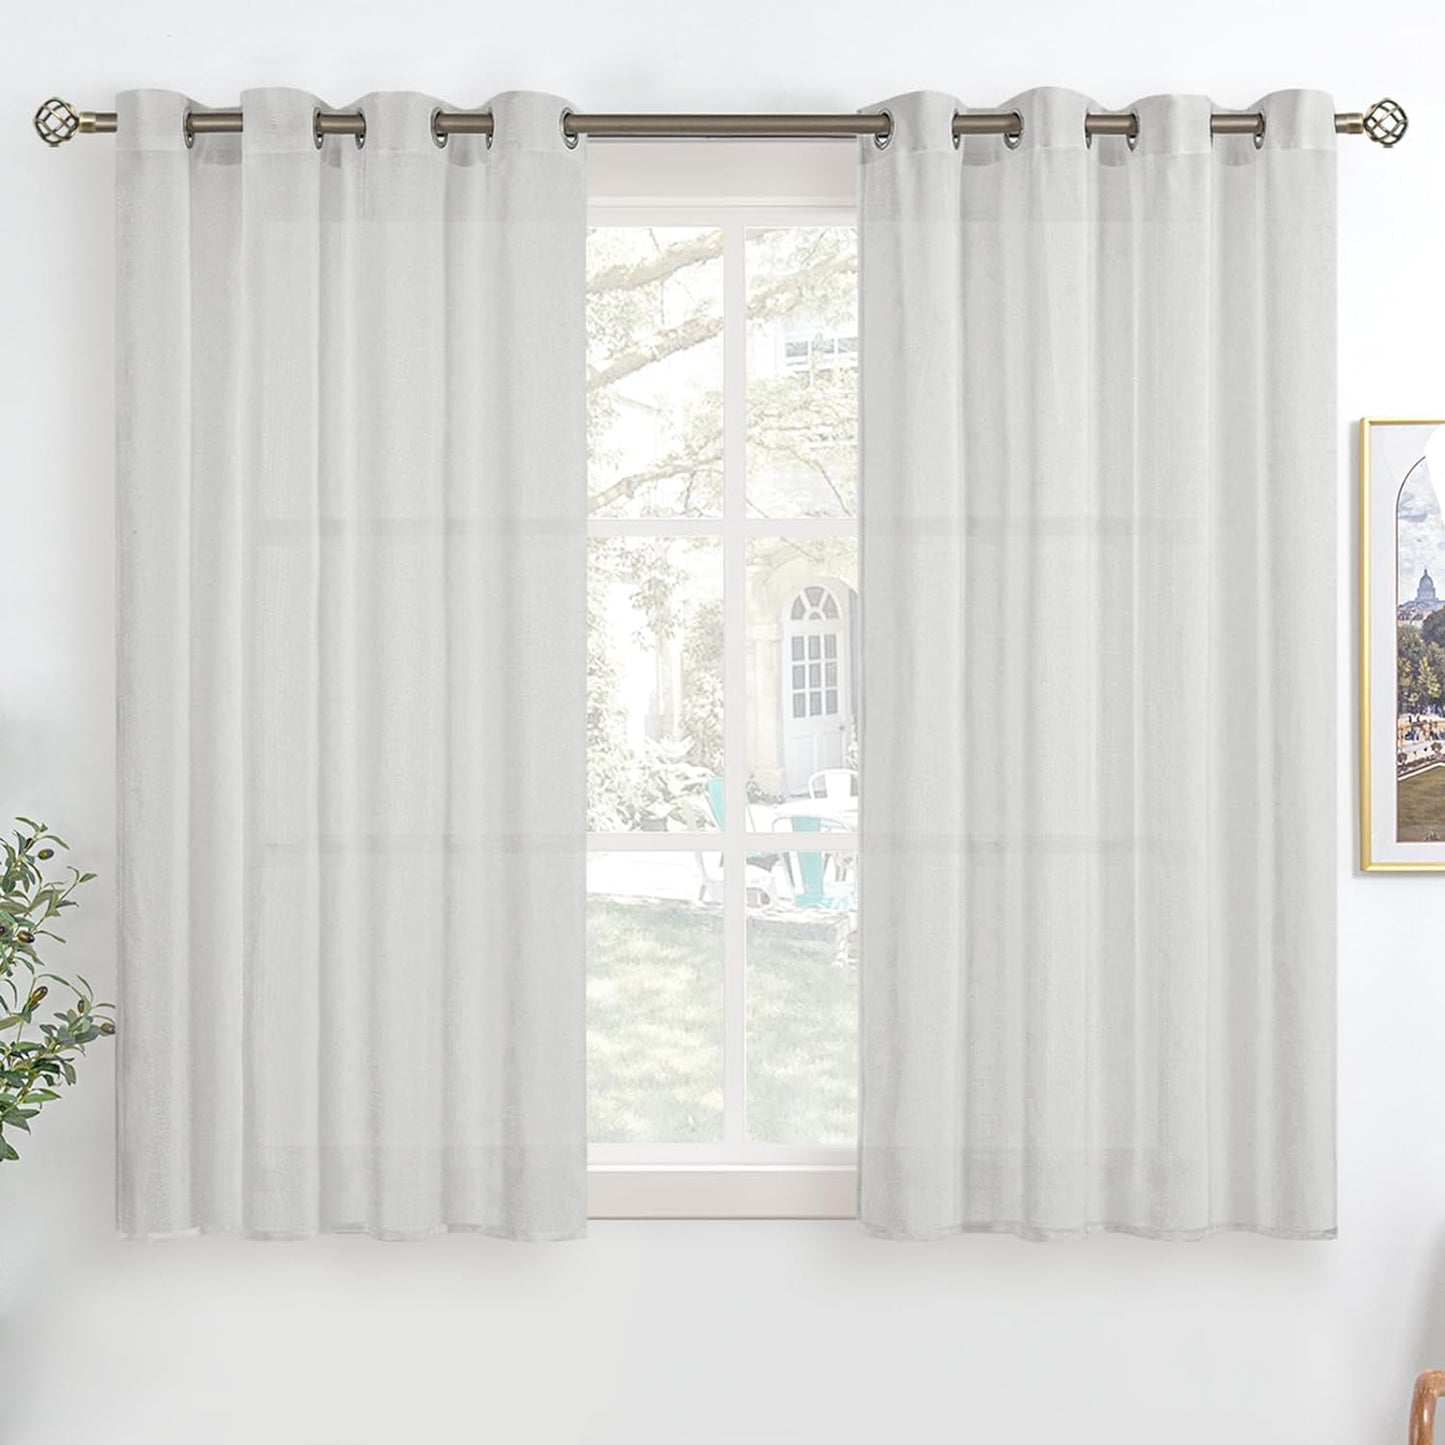 Bgment Natural Linen Look Semi Sheer Curtains for Bedroom, 52 X 54 Inch White Grommet Light Filtering Casual Textured Privacy Curtains for Bay Window, 2 Panels  BGment Light Grey 52W X 45L 